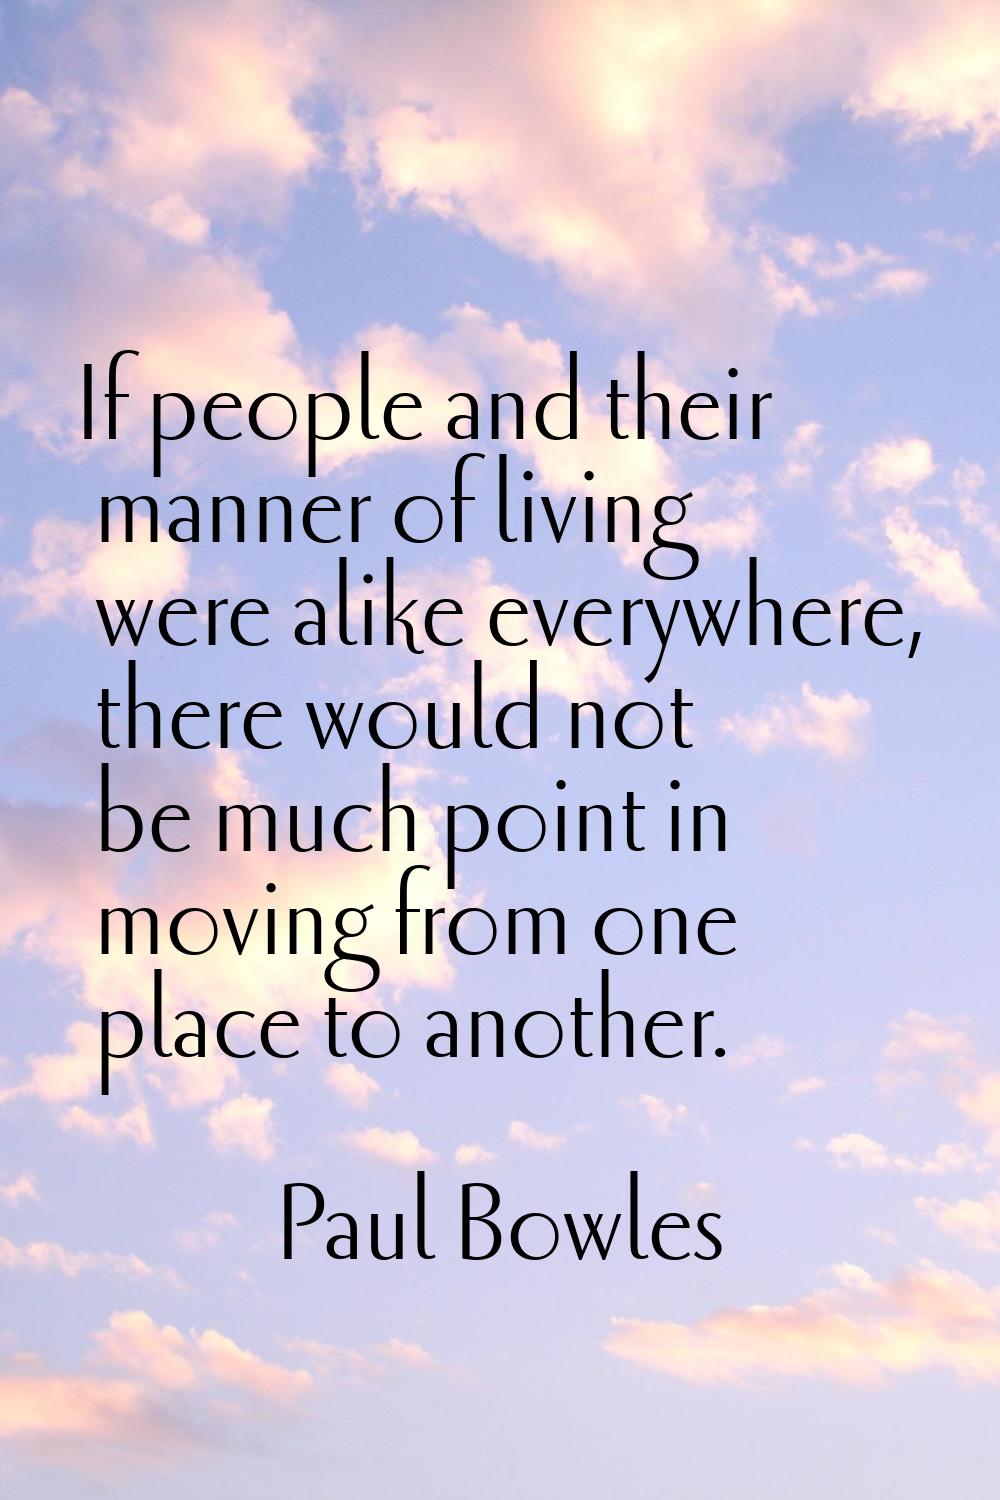 If people and their manner of living were alike everywhere, there would not be much point in moving